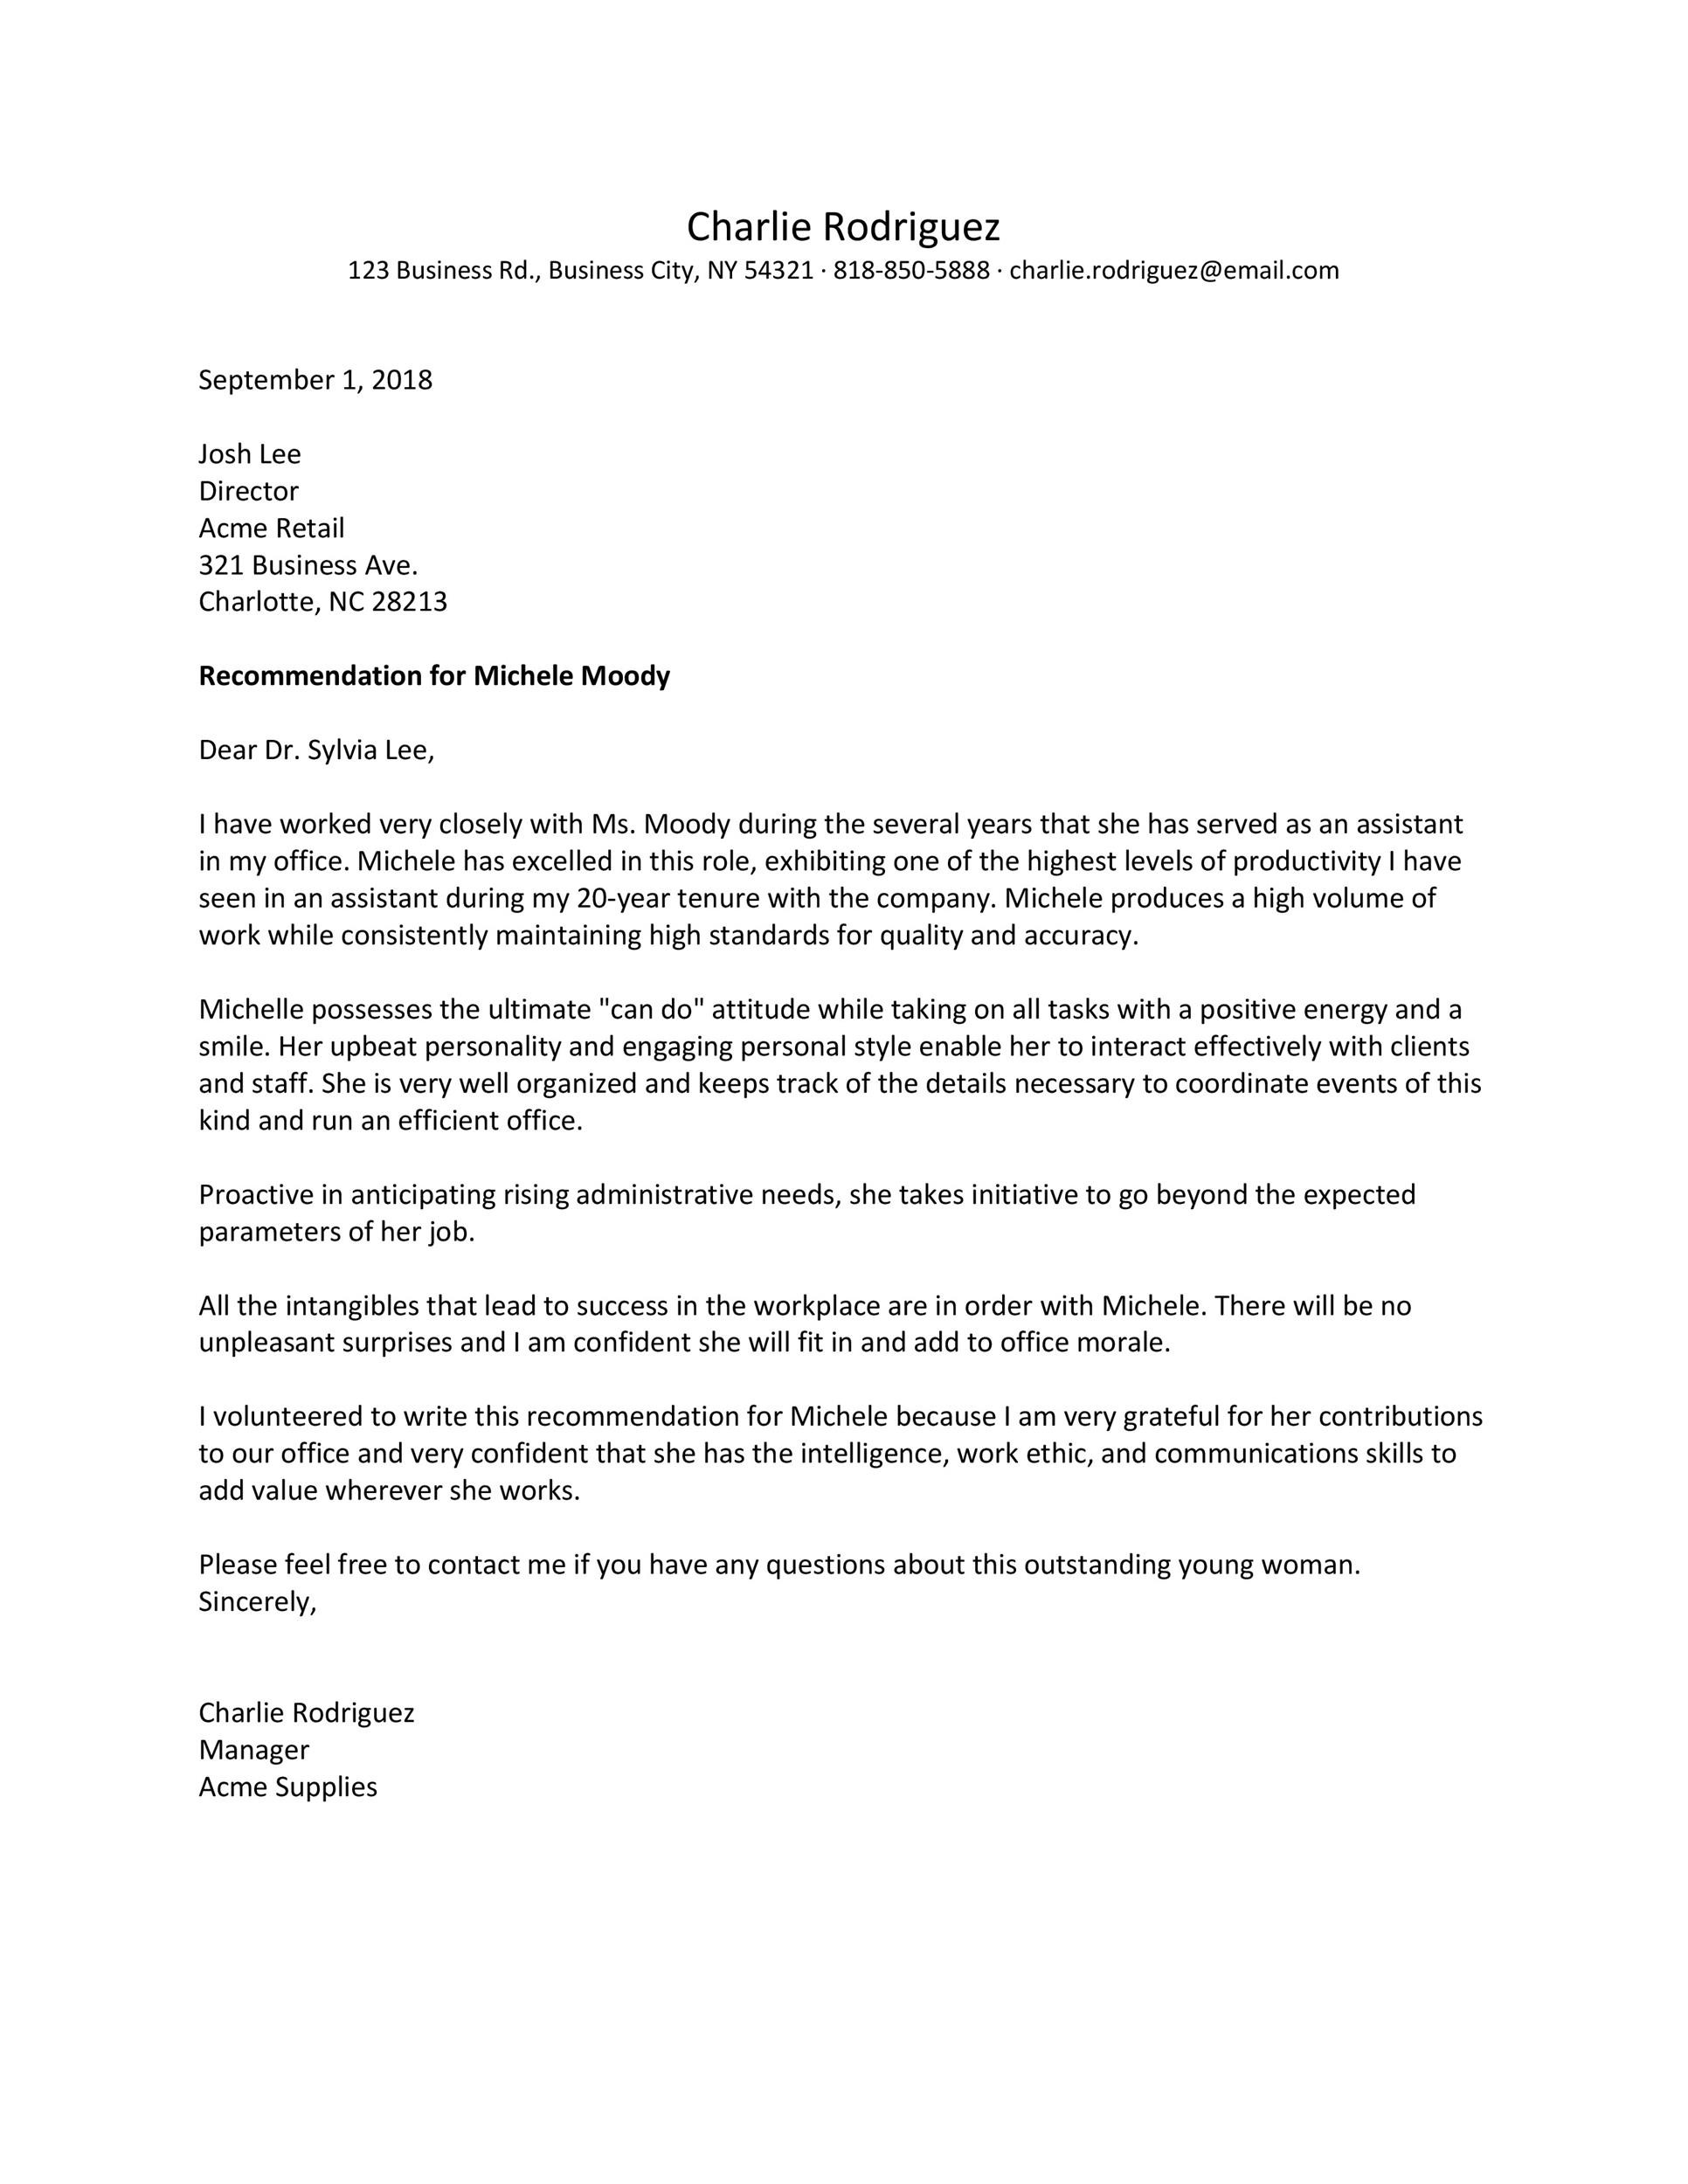 Management Letter Of Recommendation from templatelab.com